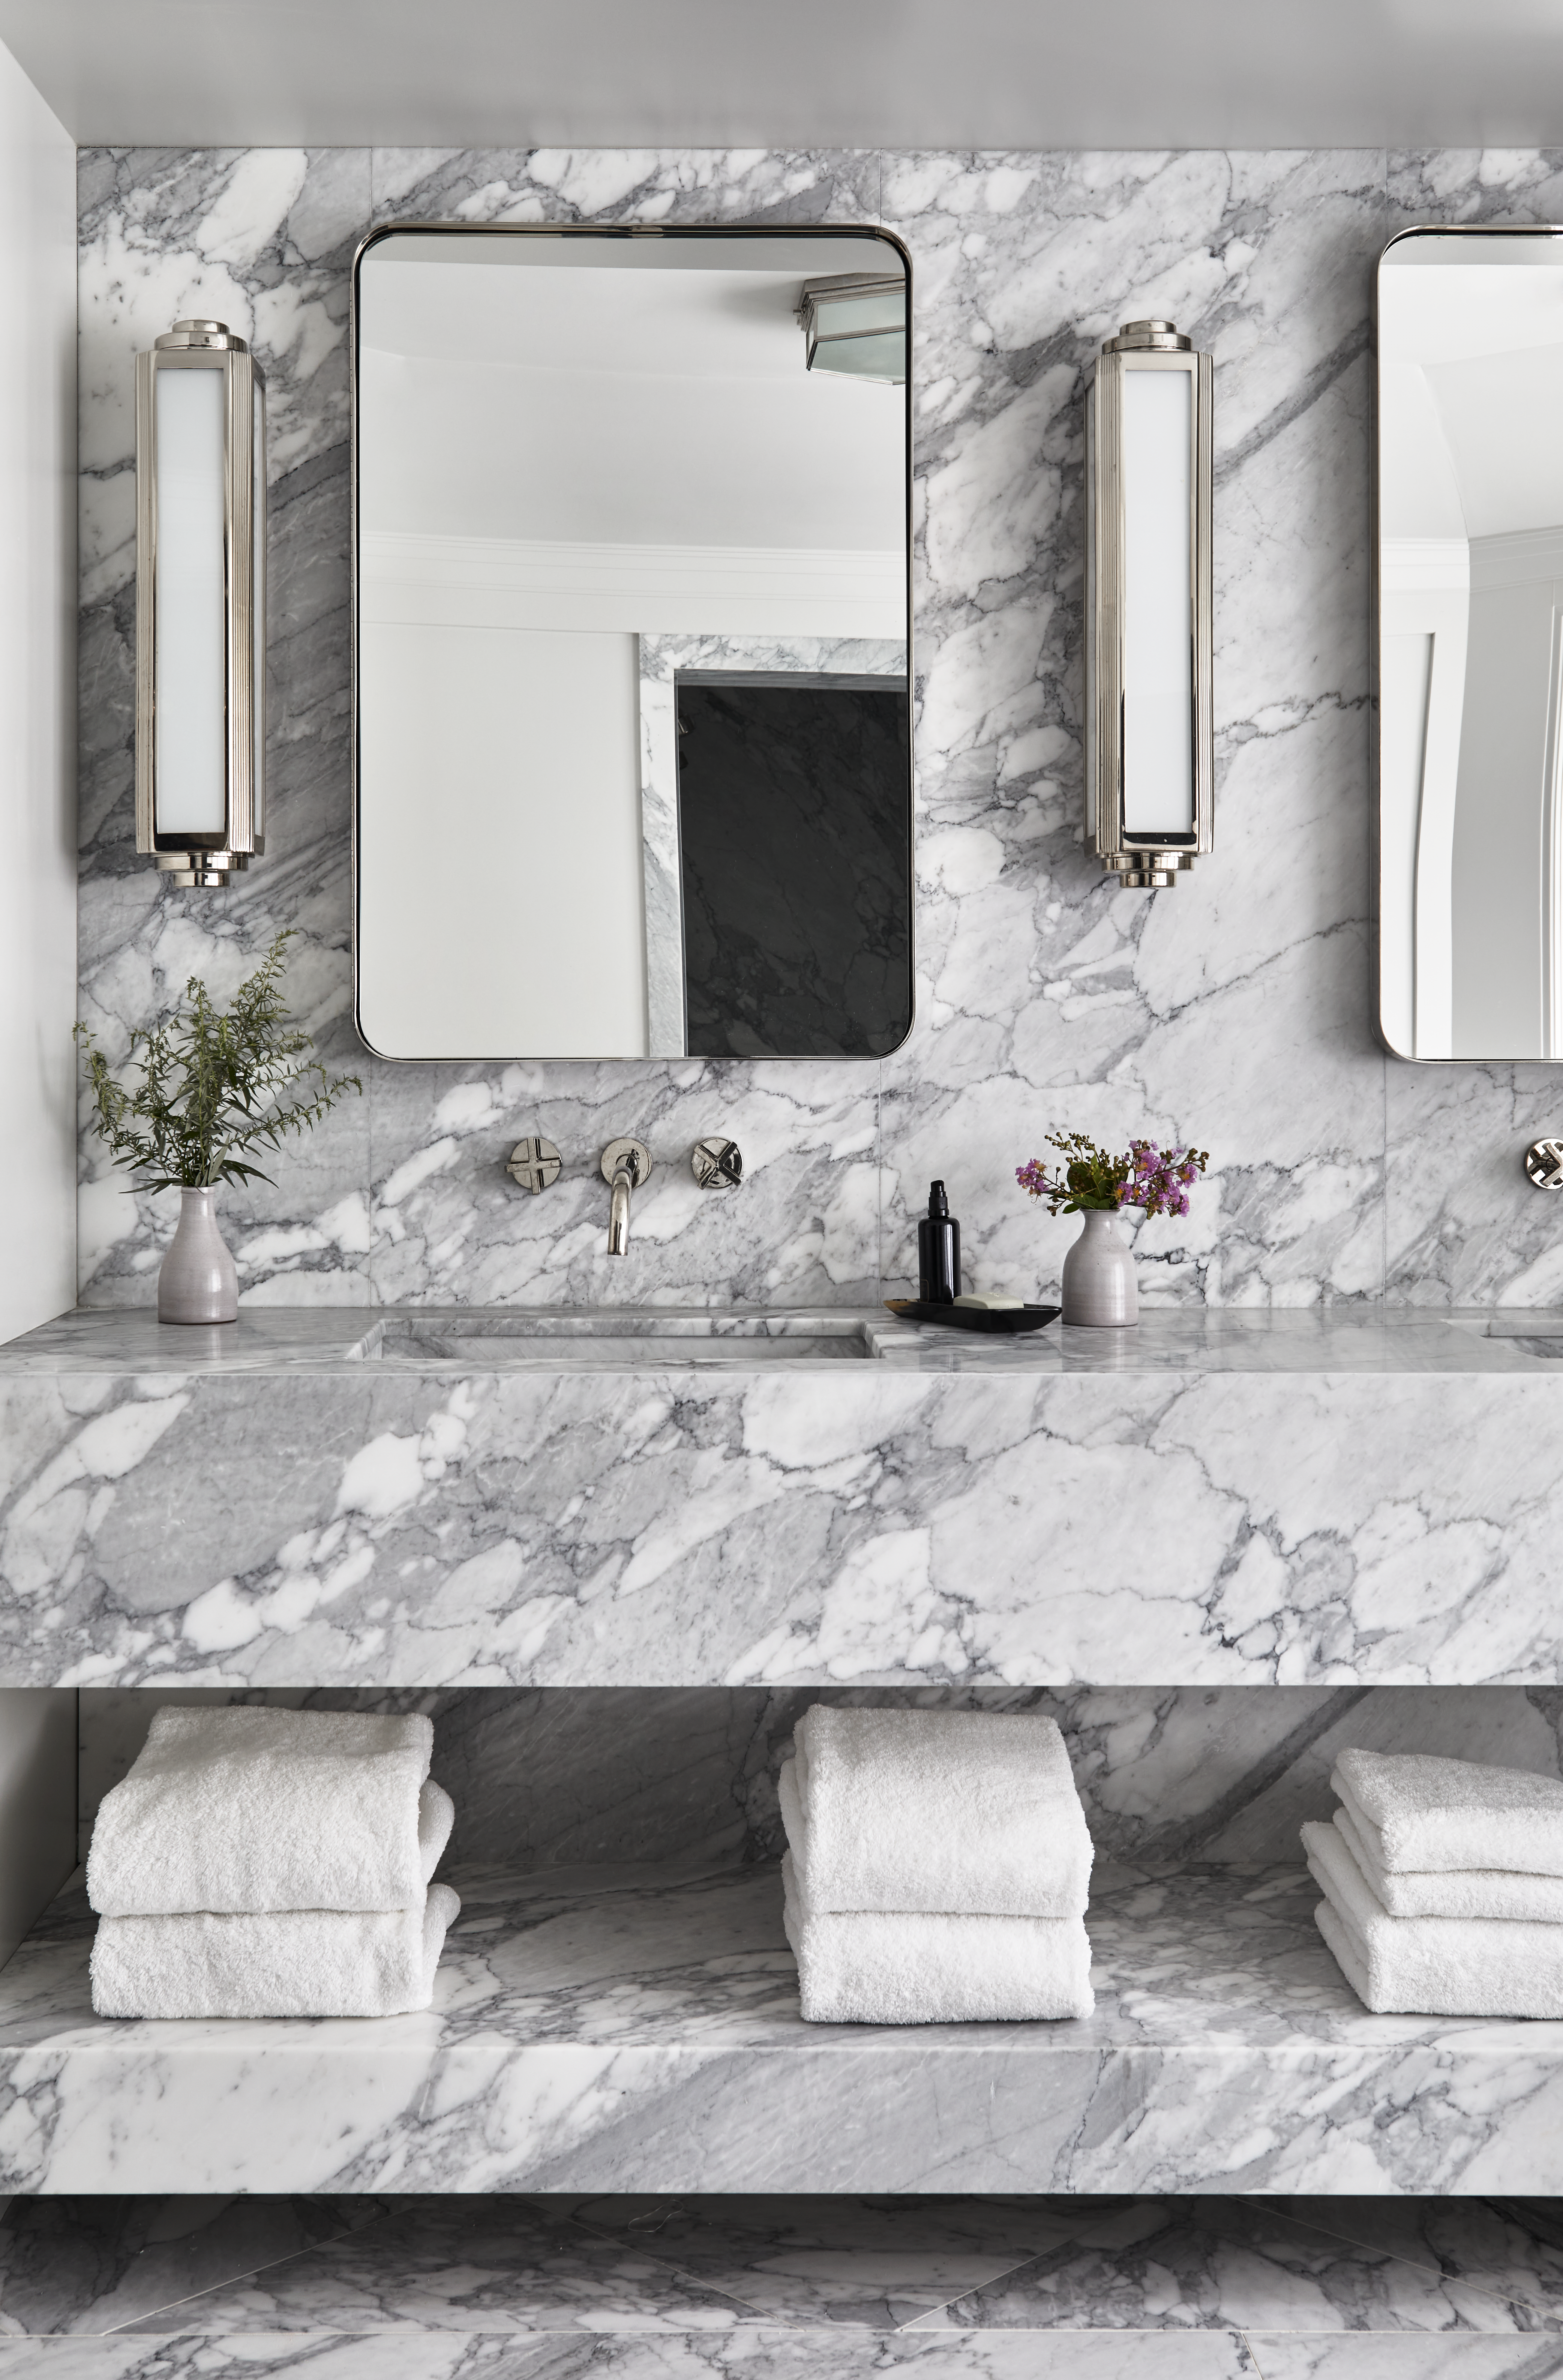 The use of chrome rather than gold in the main bath allows the Arabescato marble to command attention.
